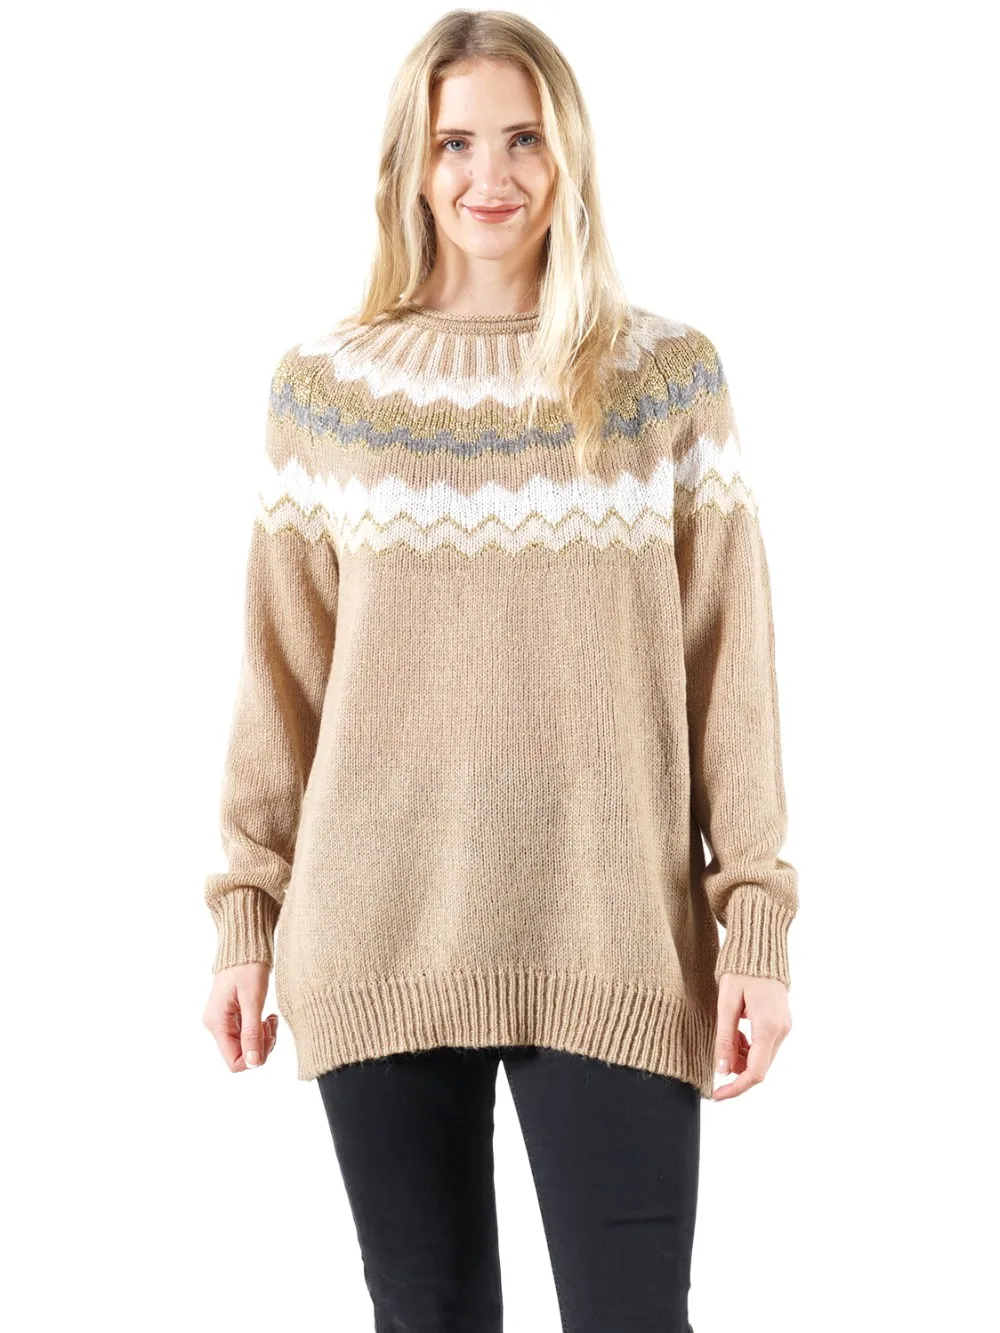 O-neck Jacquard Xmas Thick Wool Sweater For Lady - Buy Jacquard Sweater